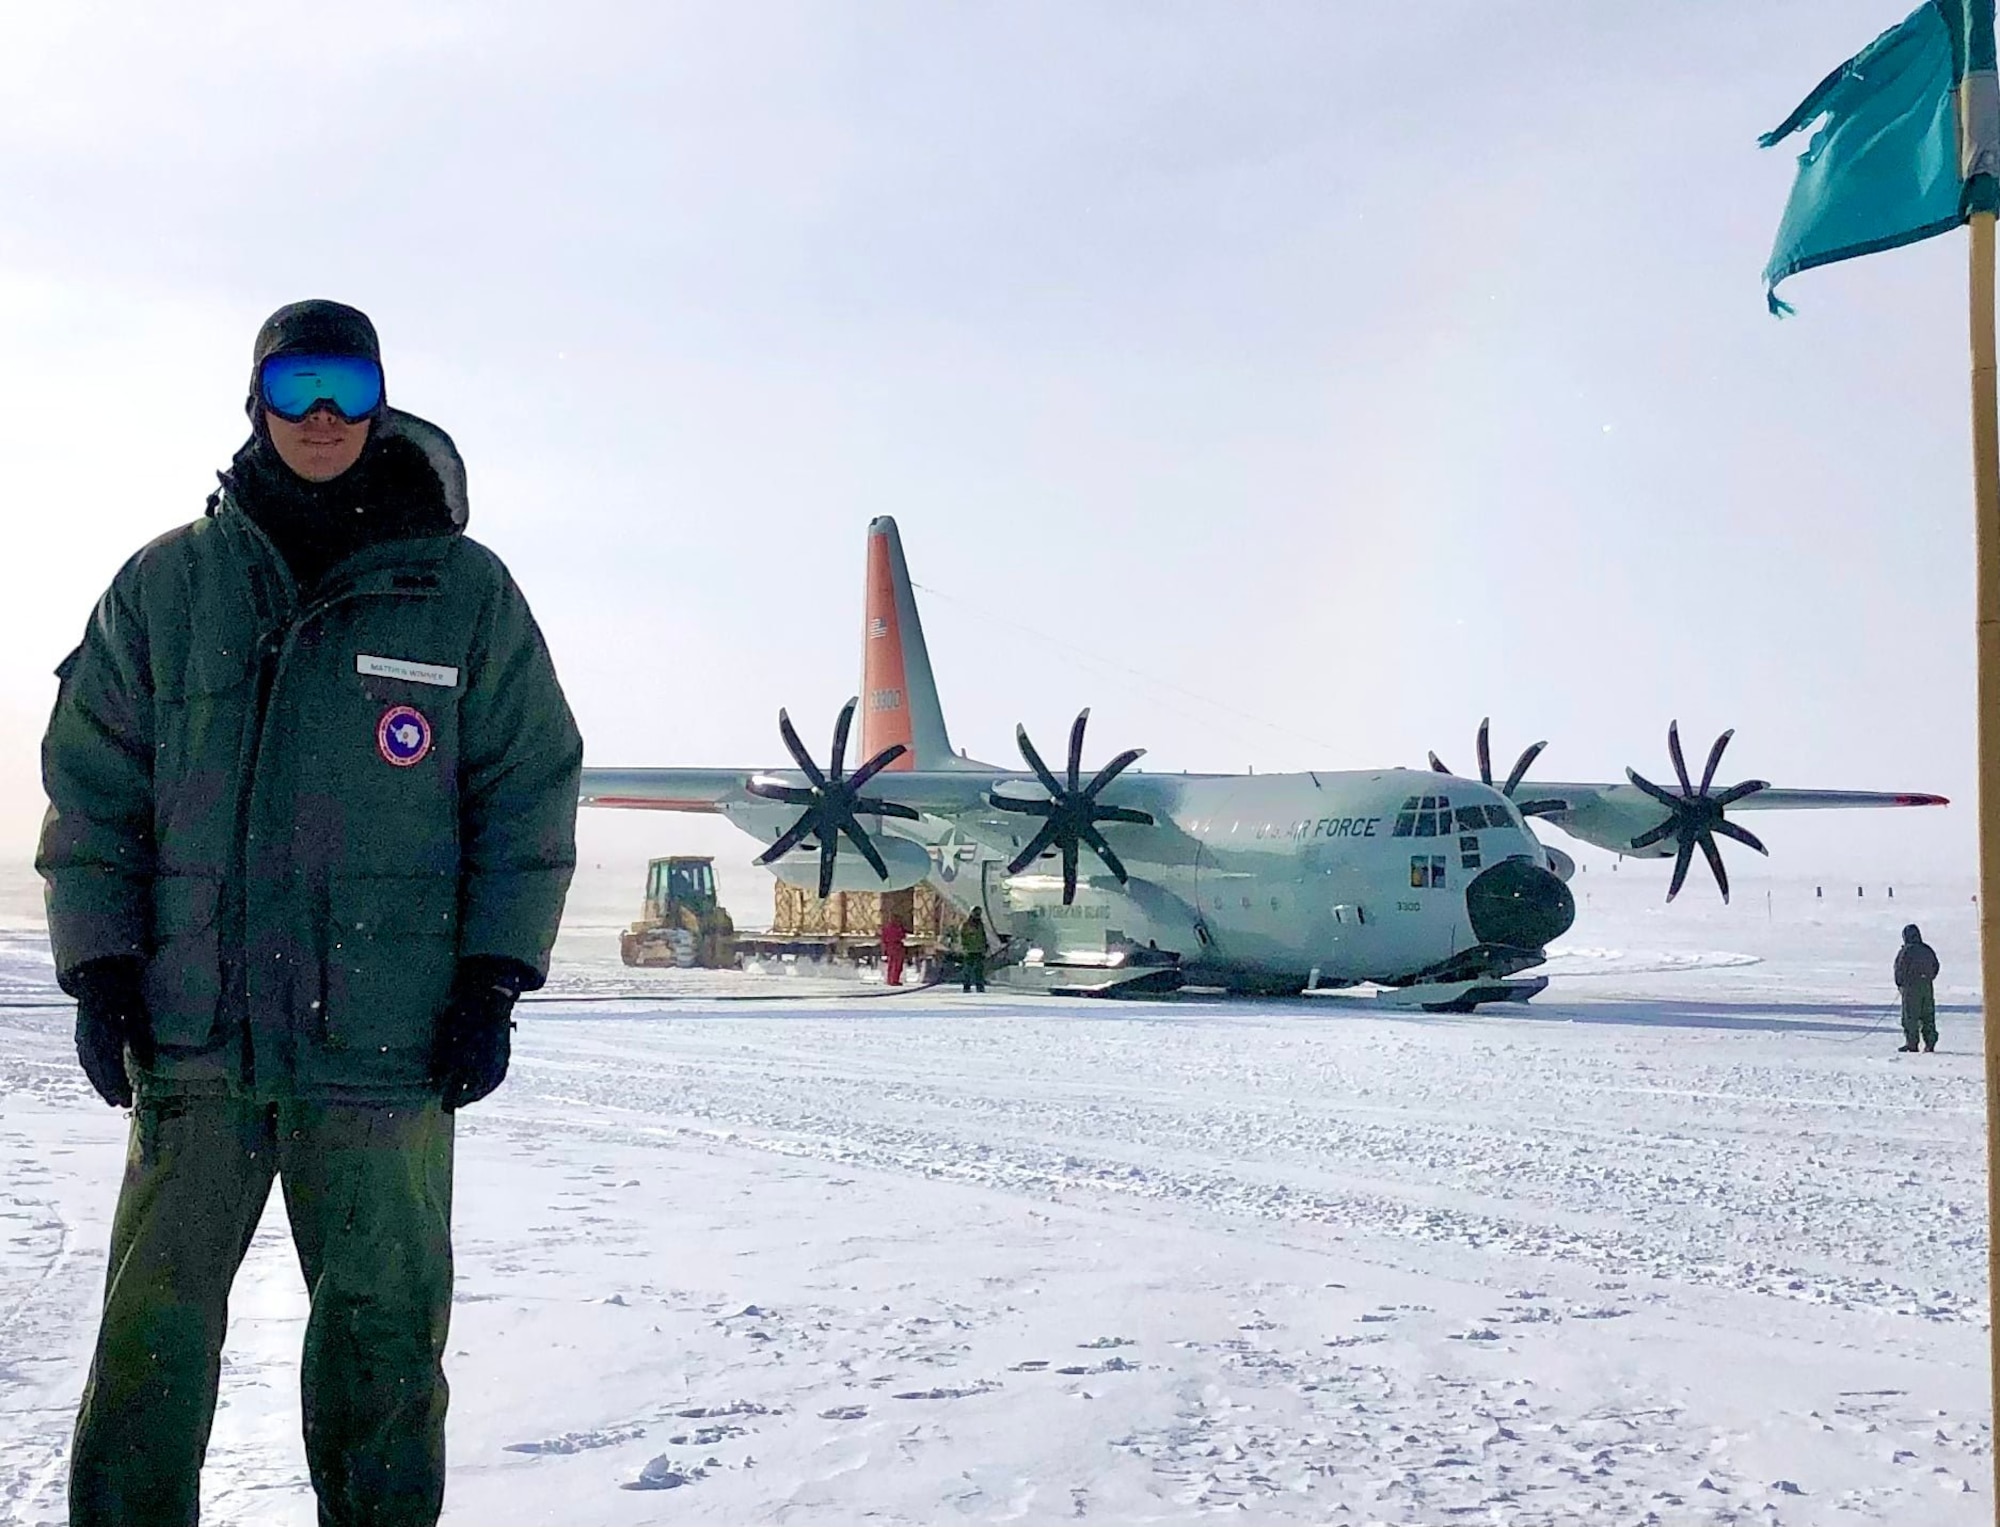 U.S. Air Force Maj. Matthew Wimmer, 56th Operations Group flight surgeon, poses for photo in front of an LC-130 aircraft on the flightline of Amundson-Scott South Pole station, Antarctica, in 2021.